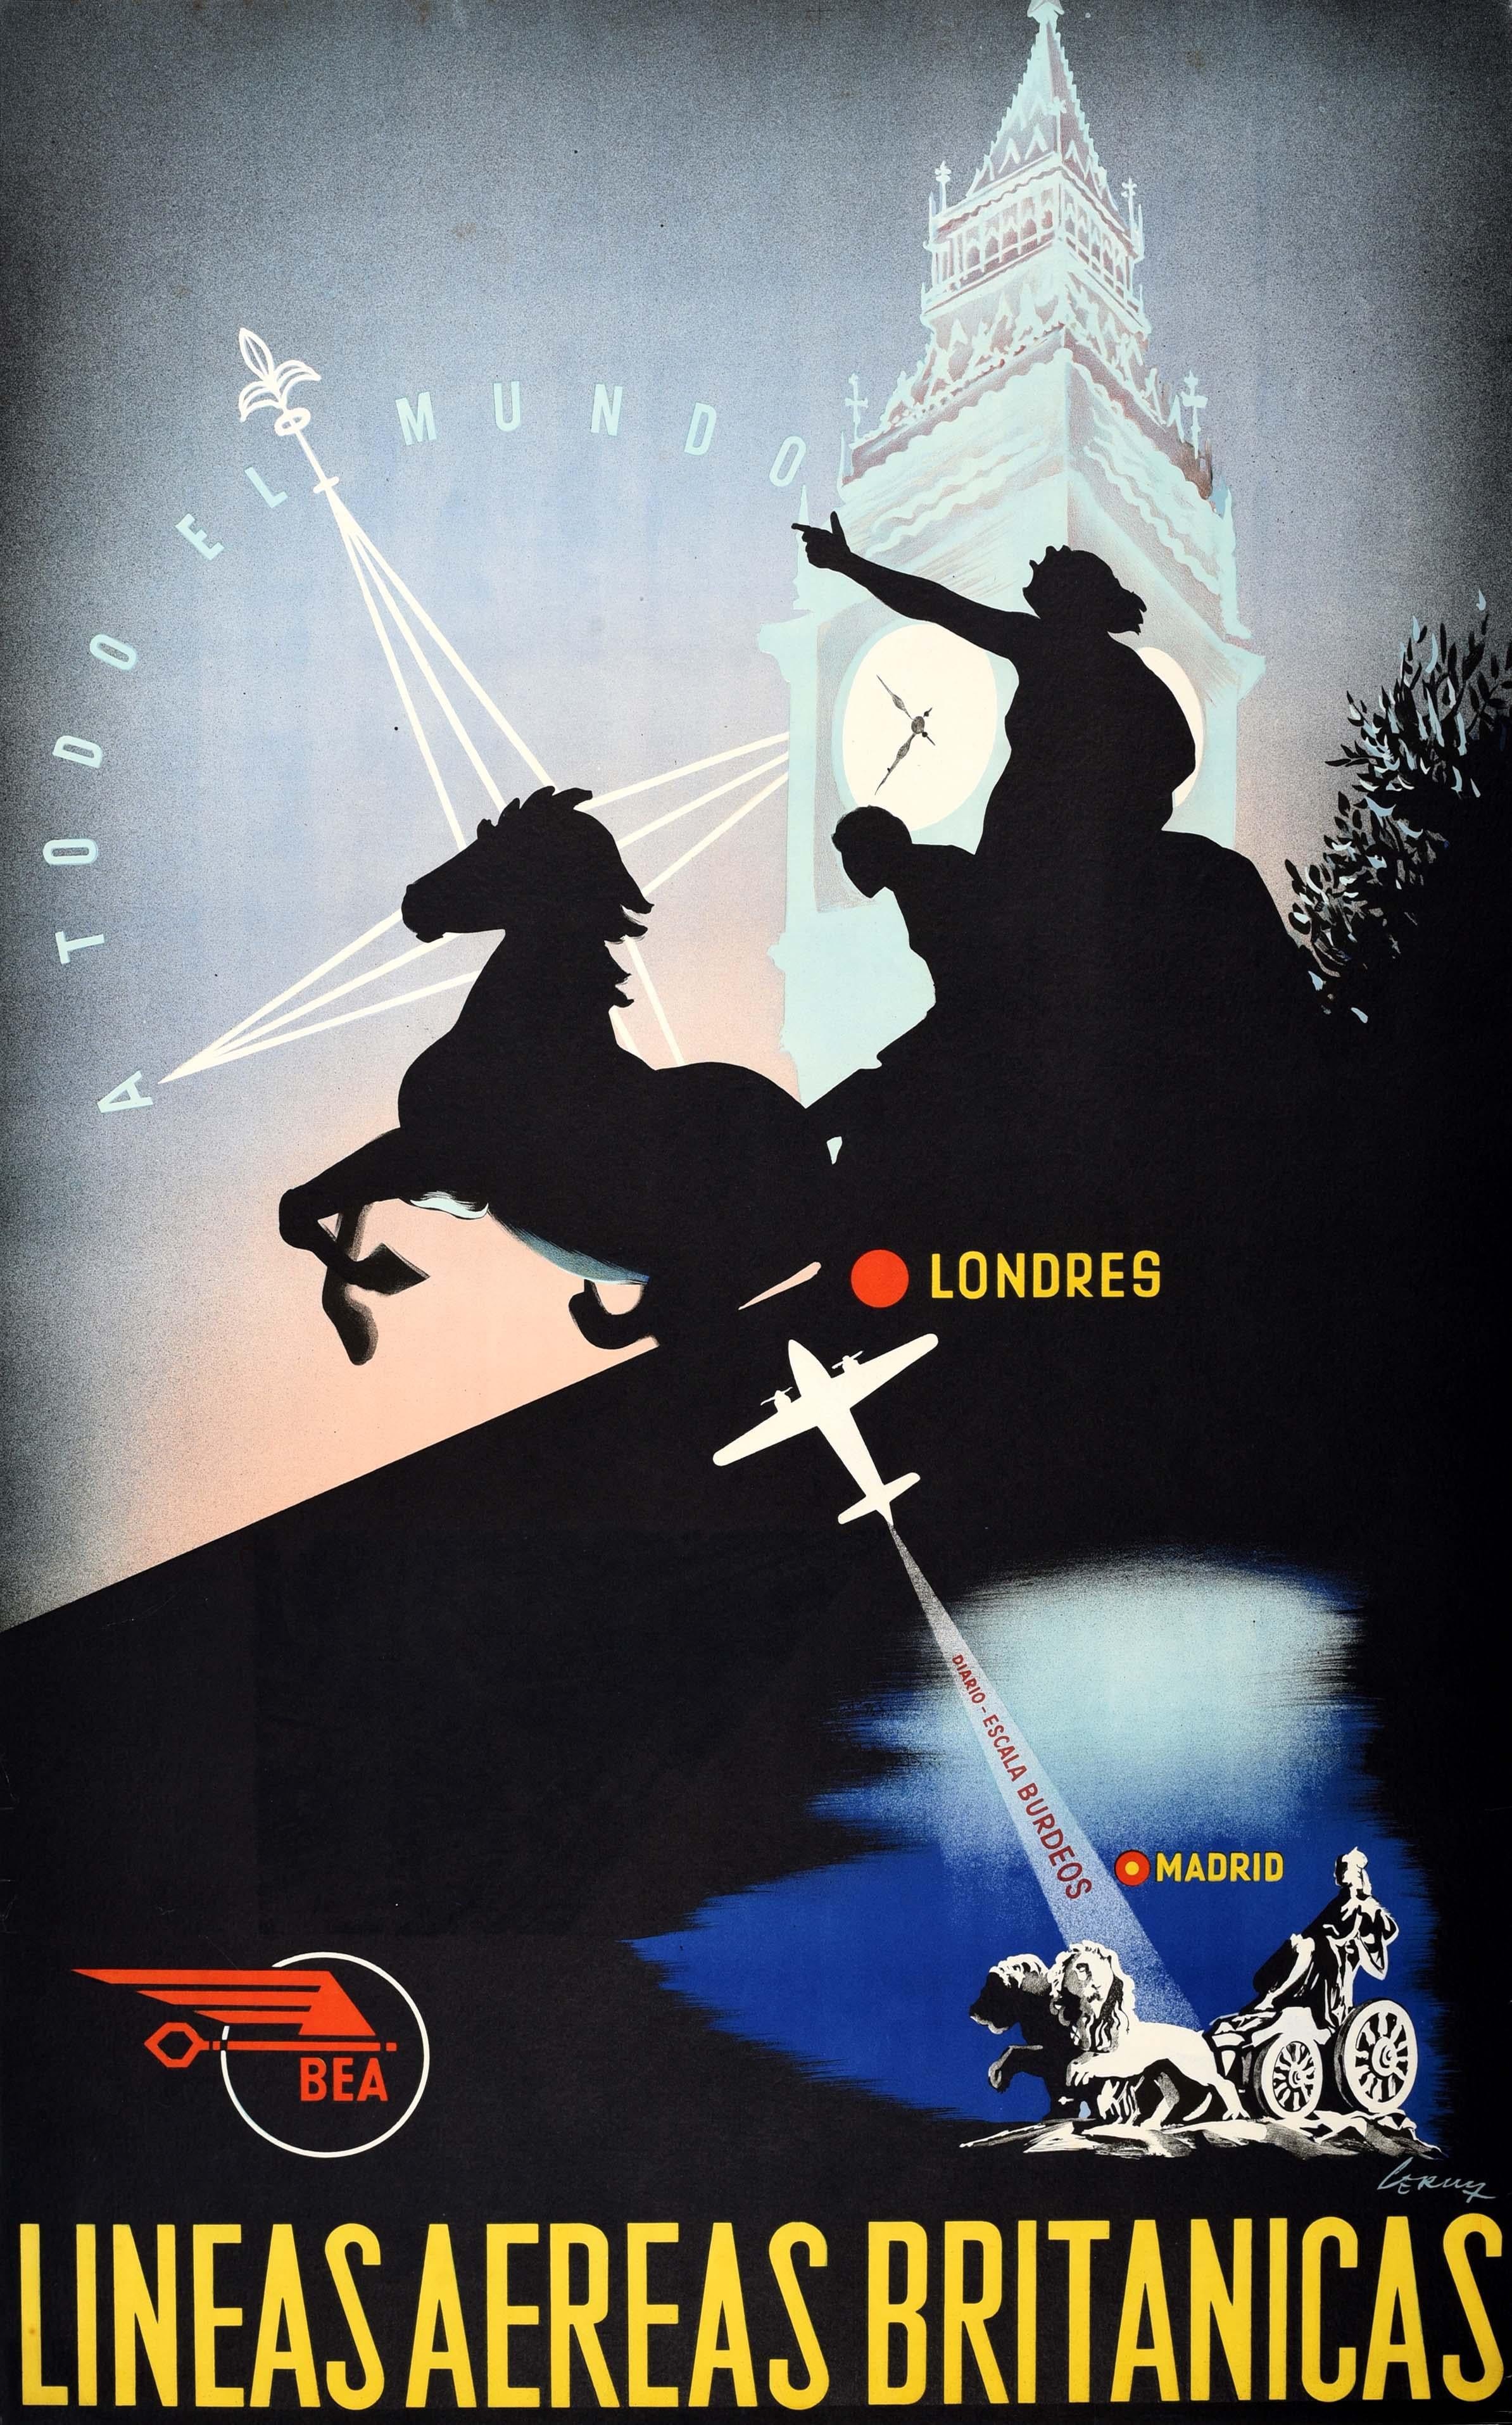 Original vintage travel advertising poster issued by BEA - Lineas Aereas Britanicas - featuring a stunning design showing a plane flying from Madrid in Spain to Londres / London in England marked with red dots and showing sculptures from the two